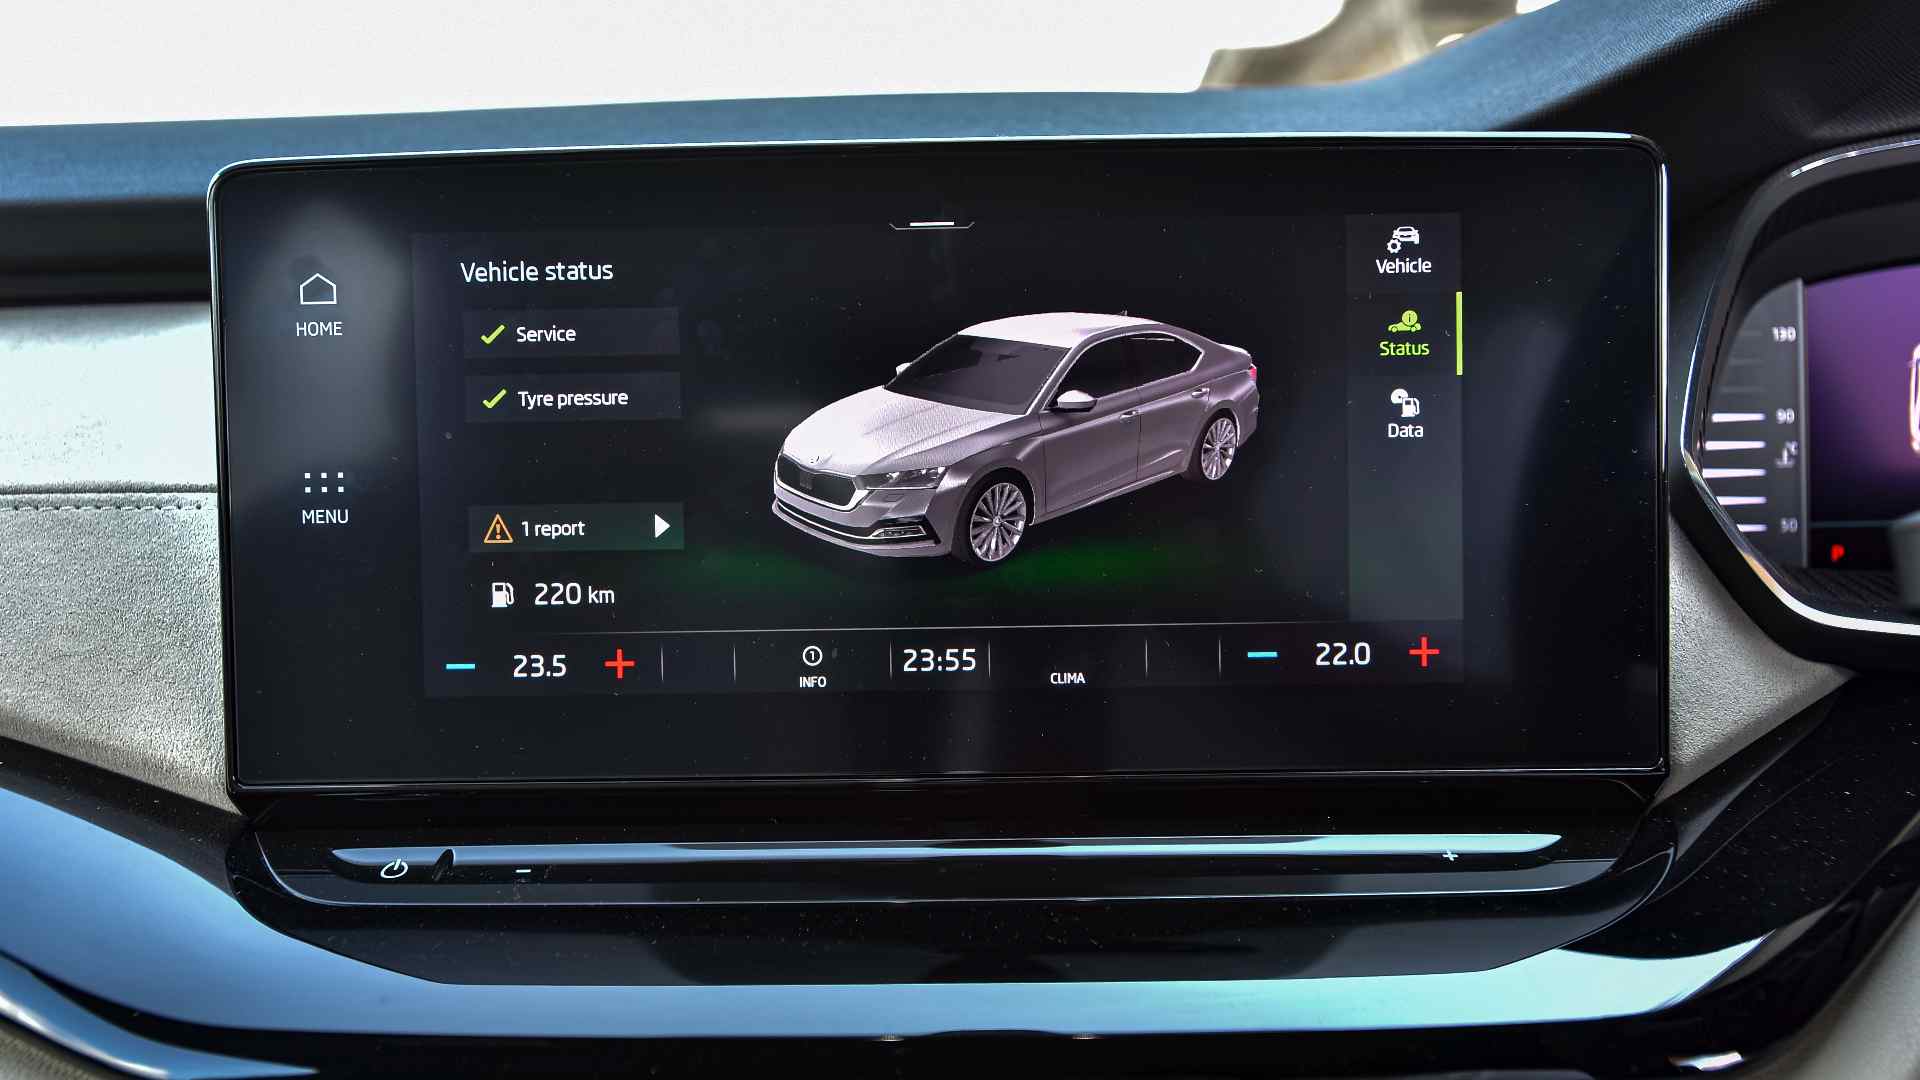 High-res 10-inch touchscreen in the 2021 Skoda Octavia is crisp and easy to use. Image: Overdrive/Anis Shaikh